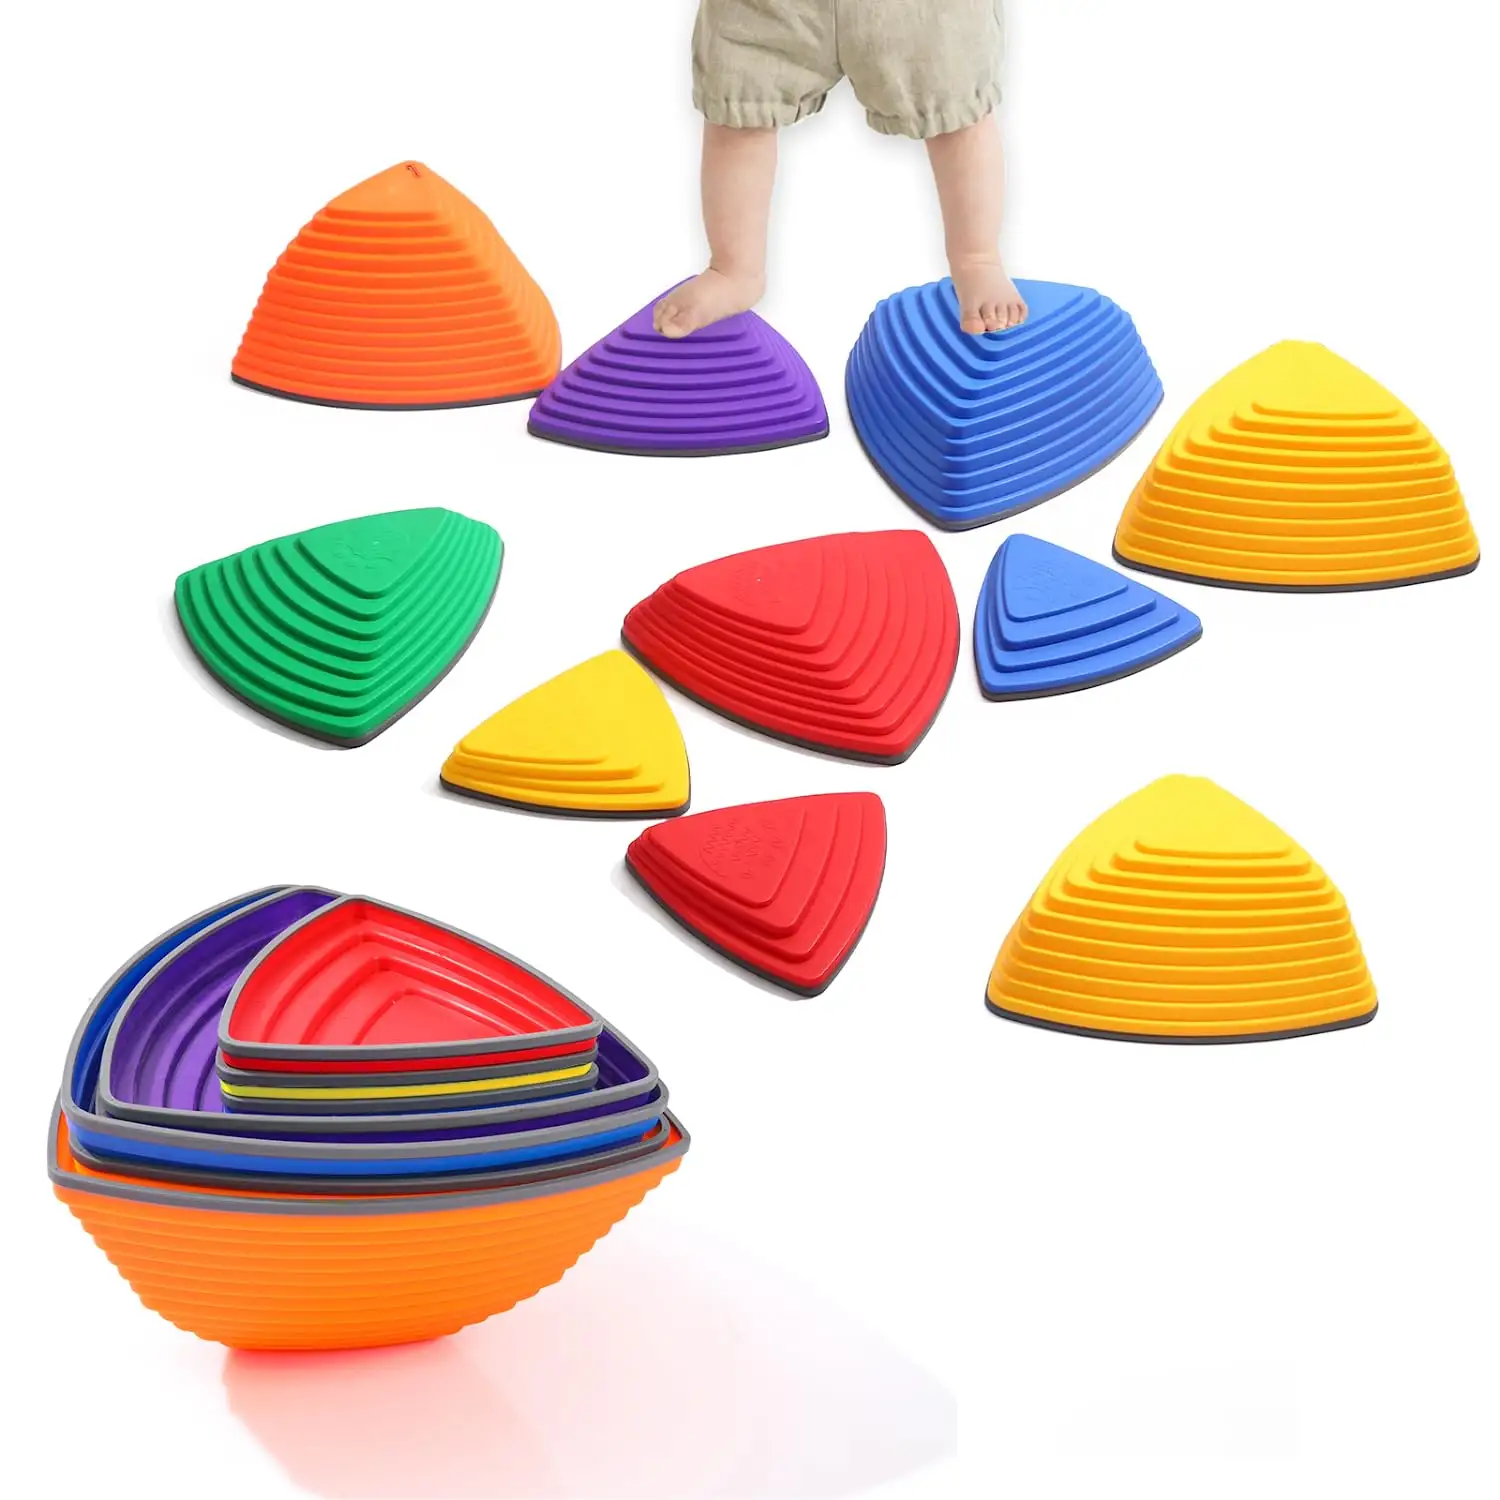 Stepping Stones for Kids Indoor & Outdoor Activity Slip-resistant help to Improve Coordination, Strength and Balance 11 pieces